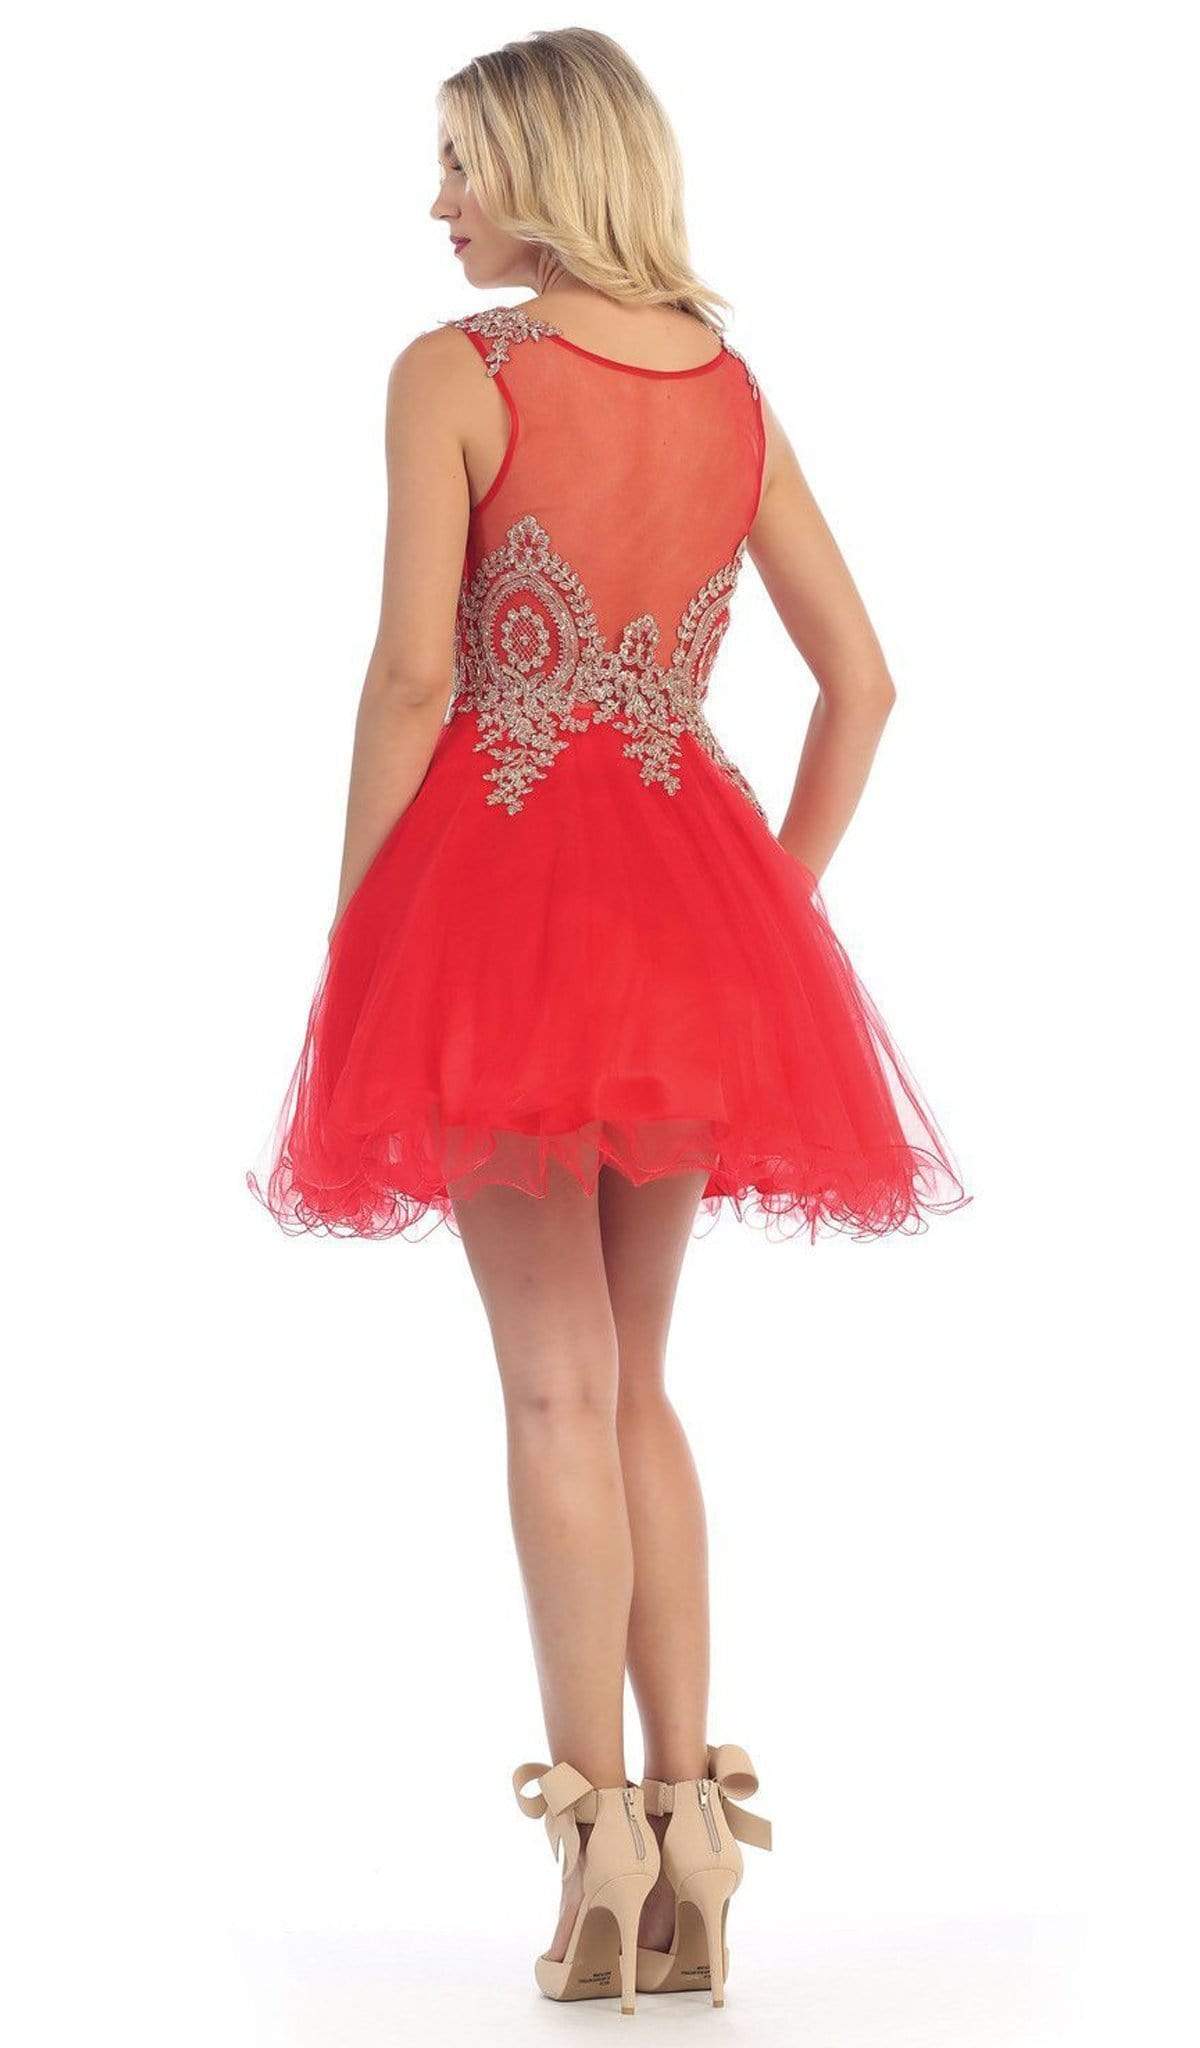 May Queen - Sleeveless Ornate Lace Illusion Cocktail Dress Special Occasion Dress